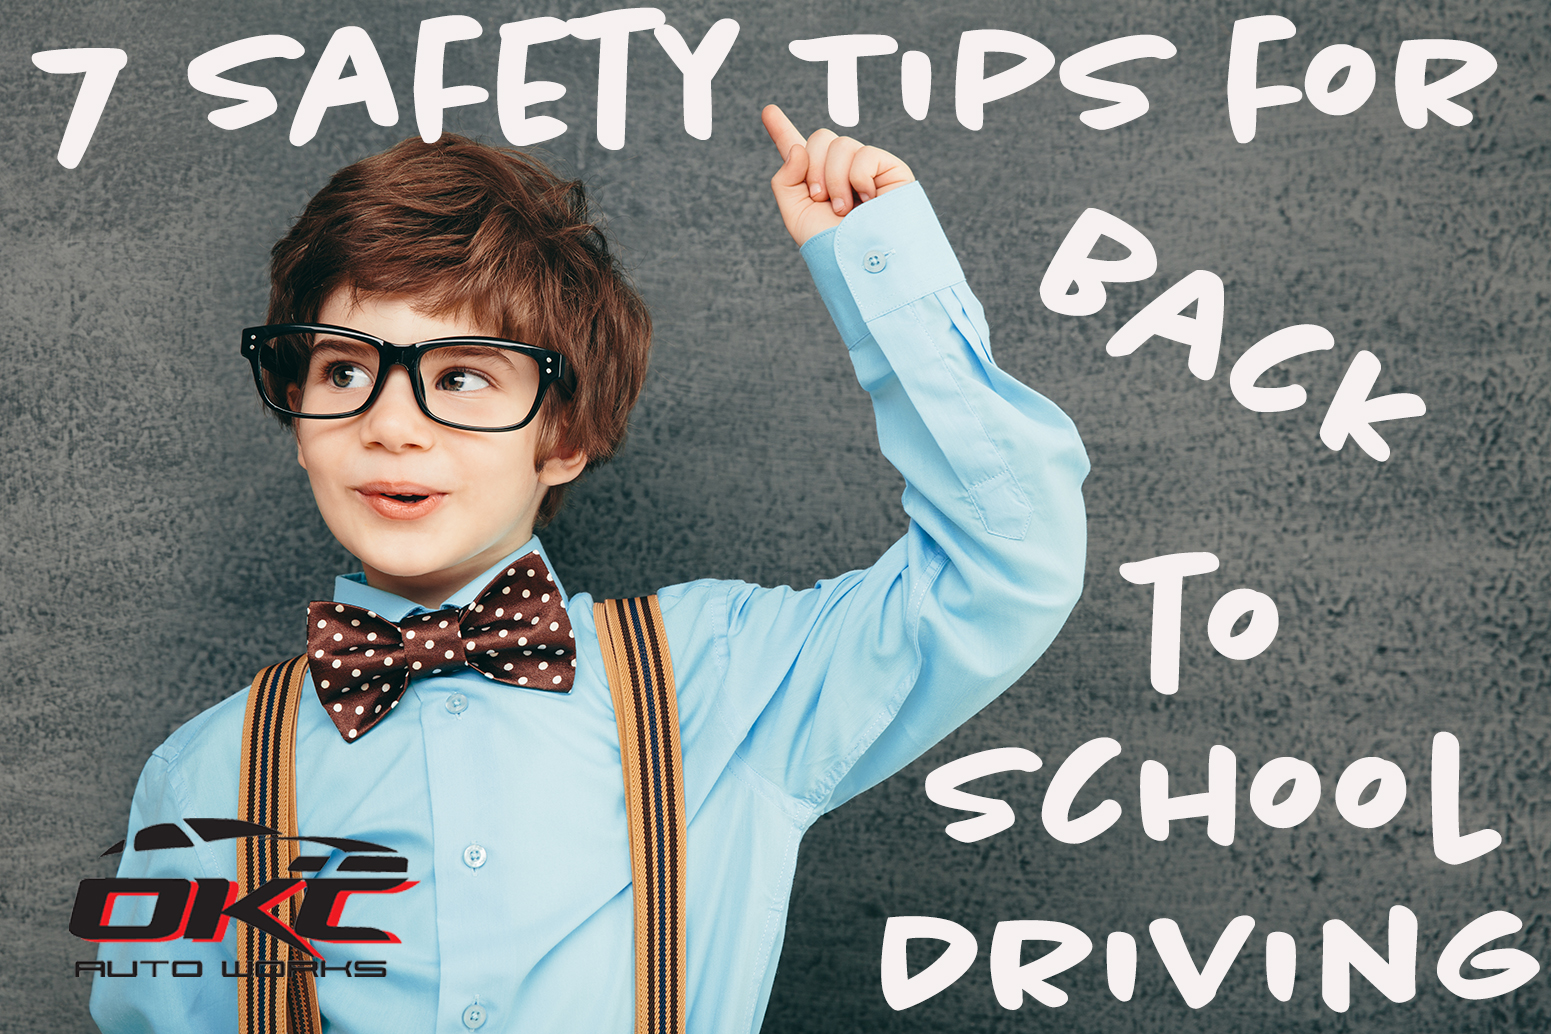 back-2-school safe driving tips, driving safety for back-to-school